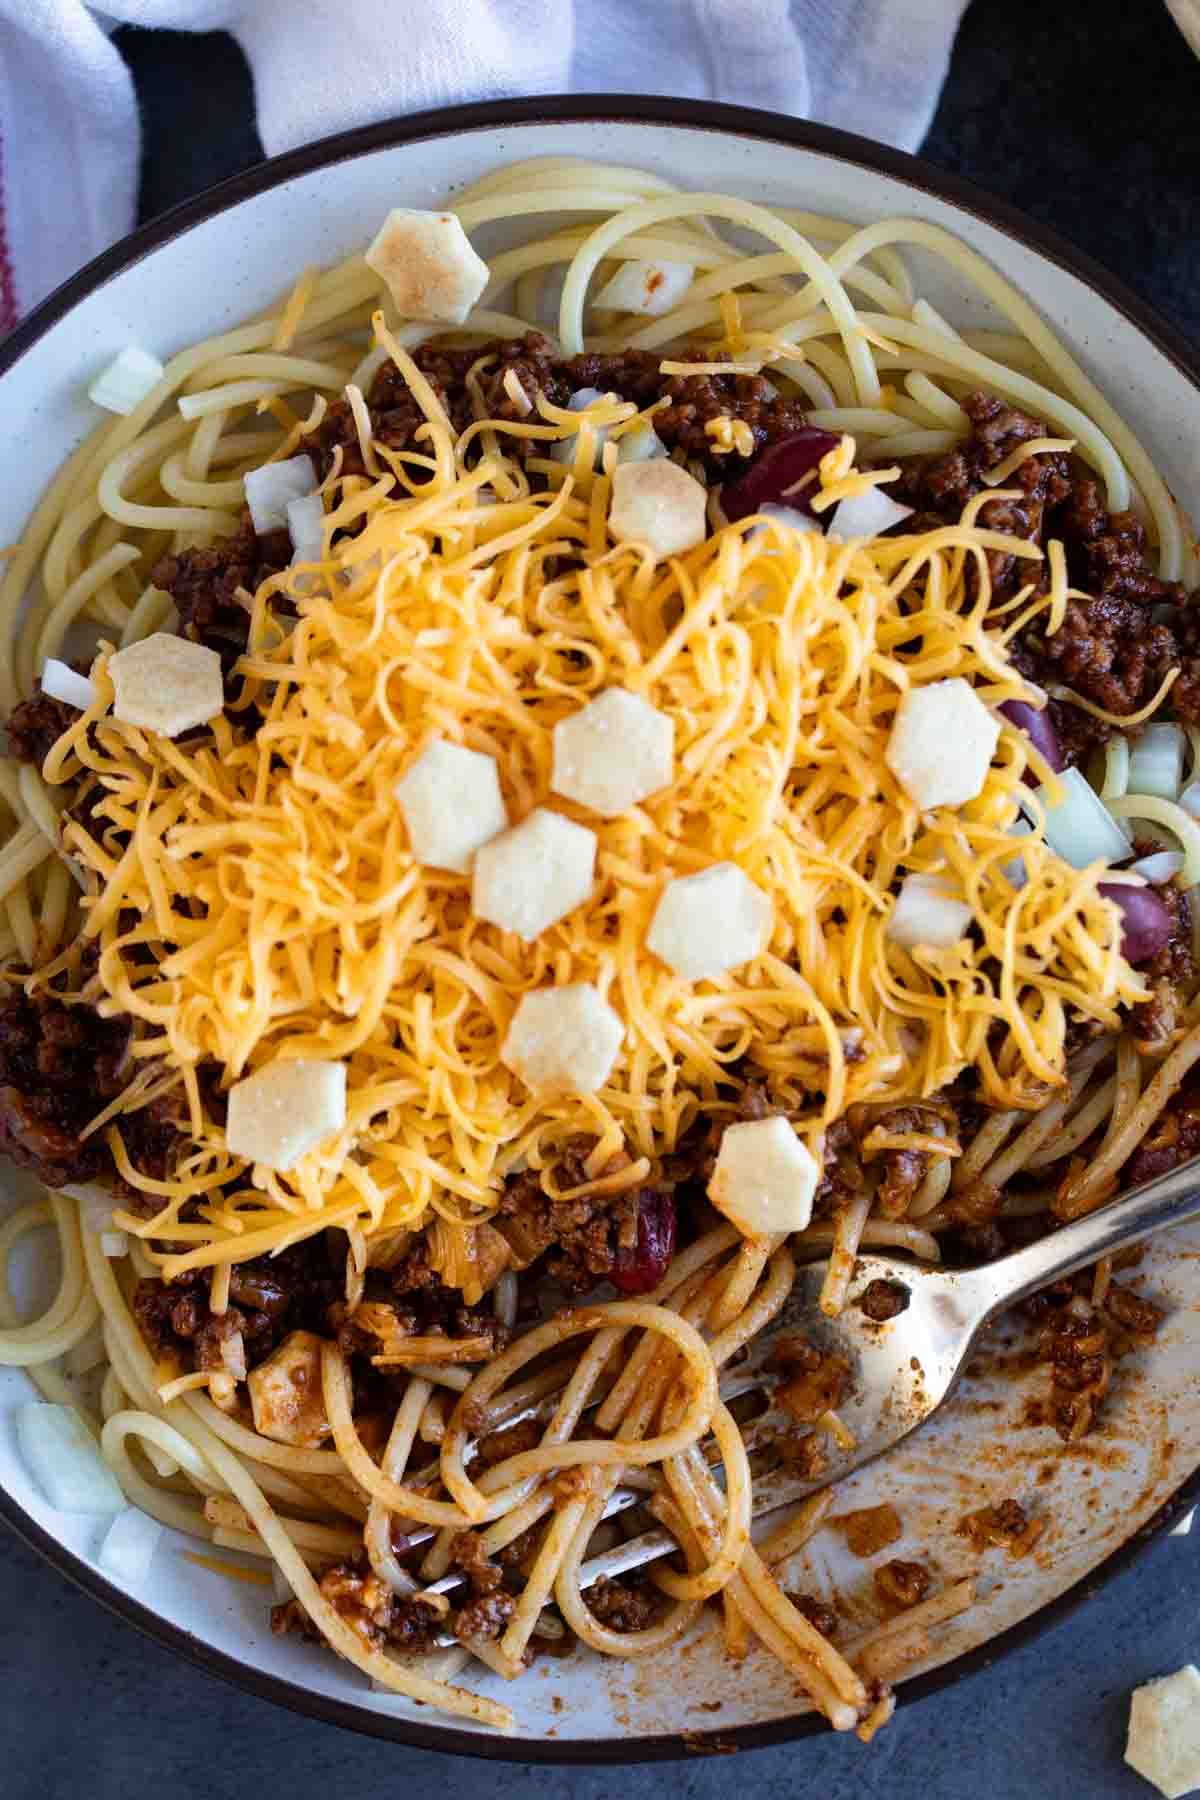 Spaghetti topped with Cincinnati Chili, beans, onions, and cheese.